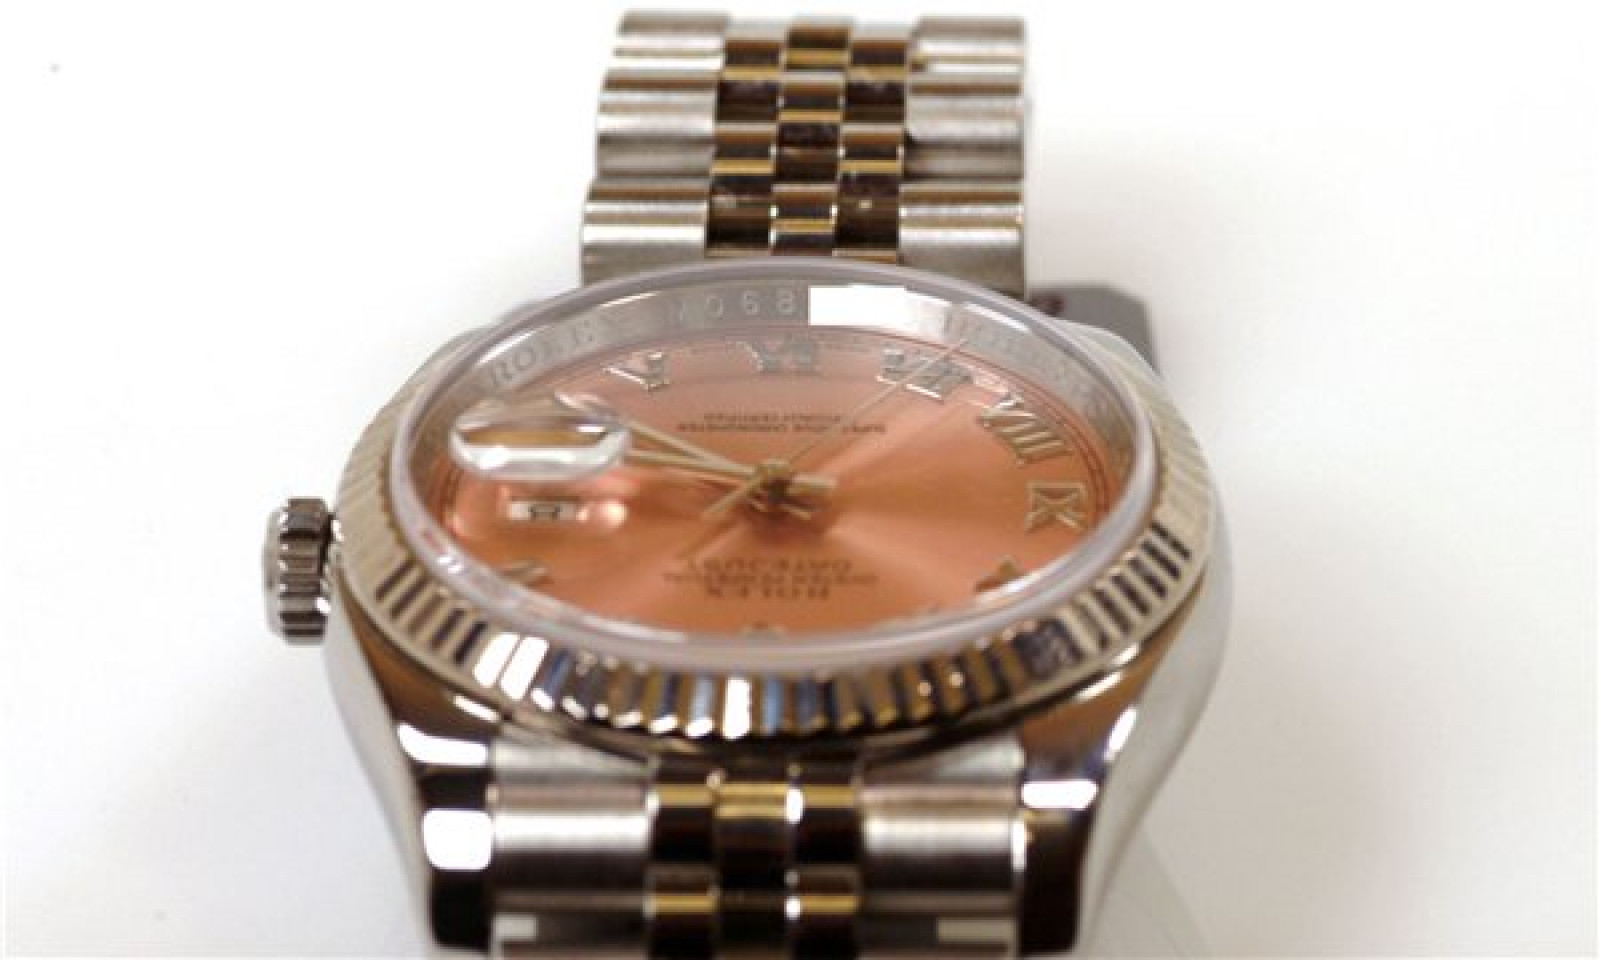 Rolex Datejust 116234 Steel with Rose Dial & Roman Markers